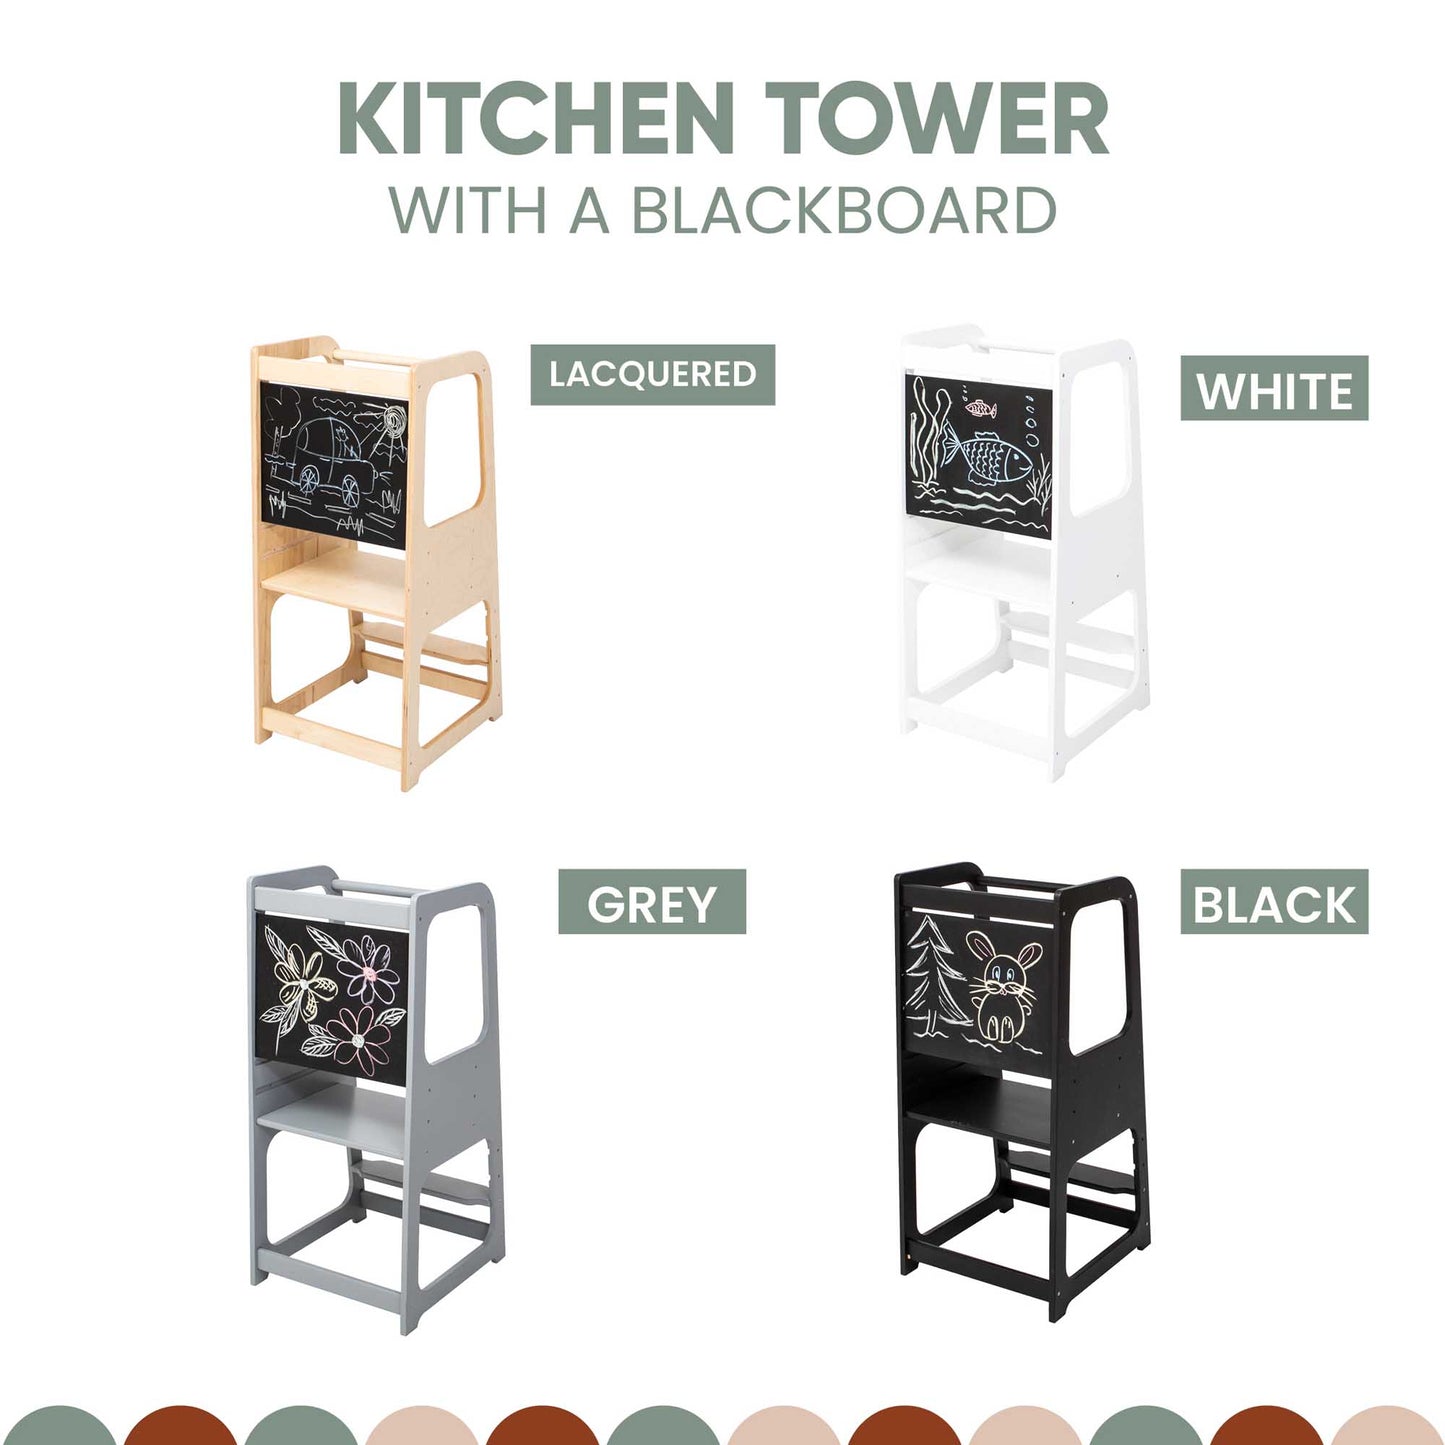 All four kitchen tower colors awailable- lacquered, white, grey, black.